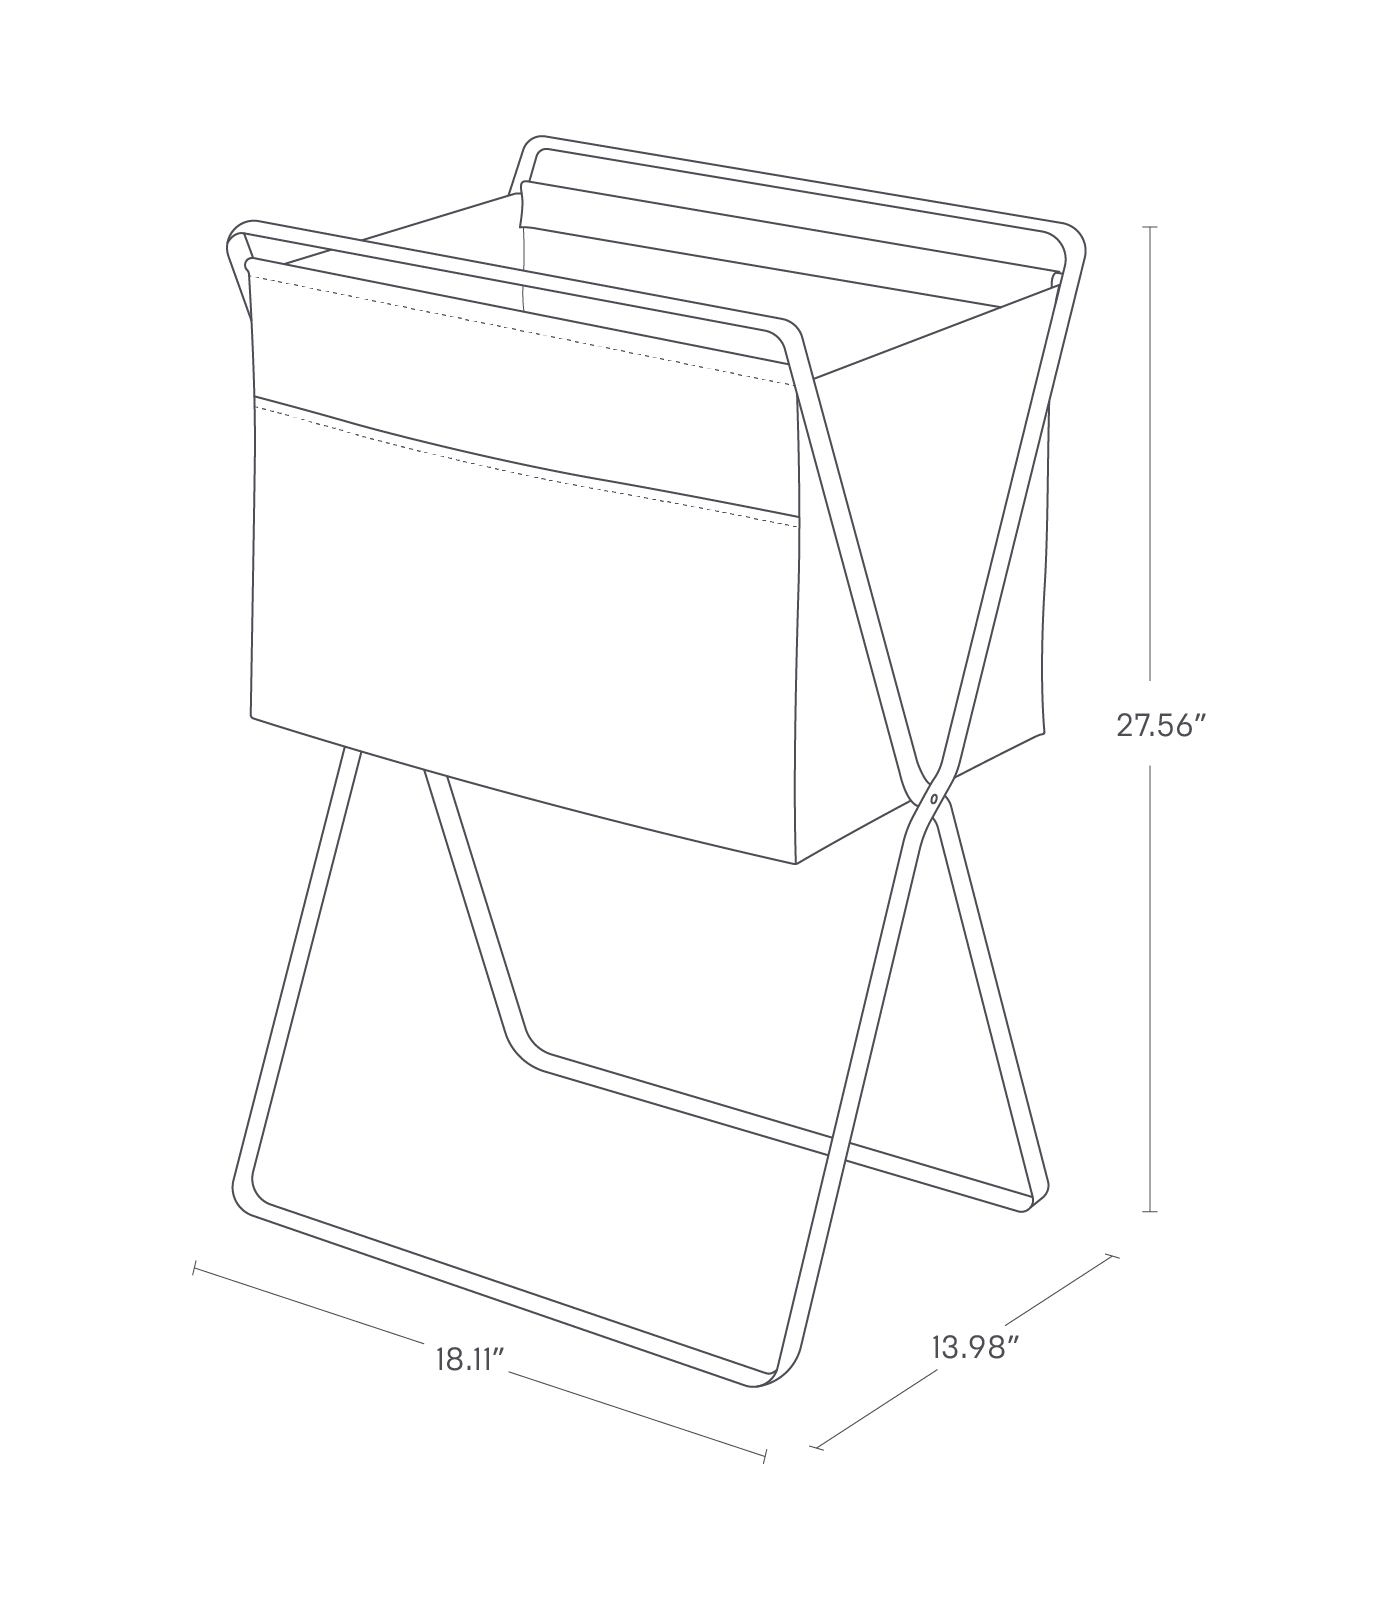 Dimension image for Folding Storage Hamper - Two Sizes on a white background including dimensions  L 14 x W 18.1 x H 27.6 inches